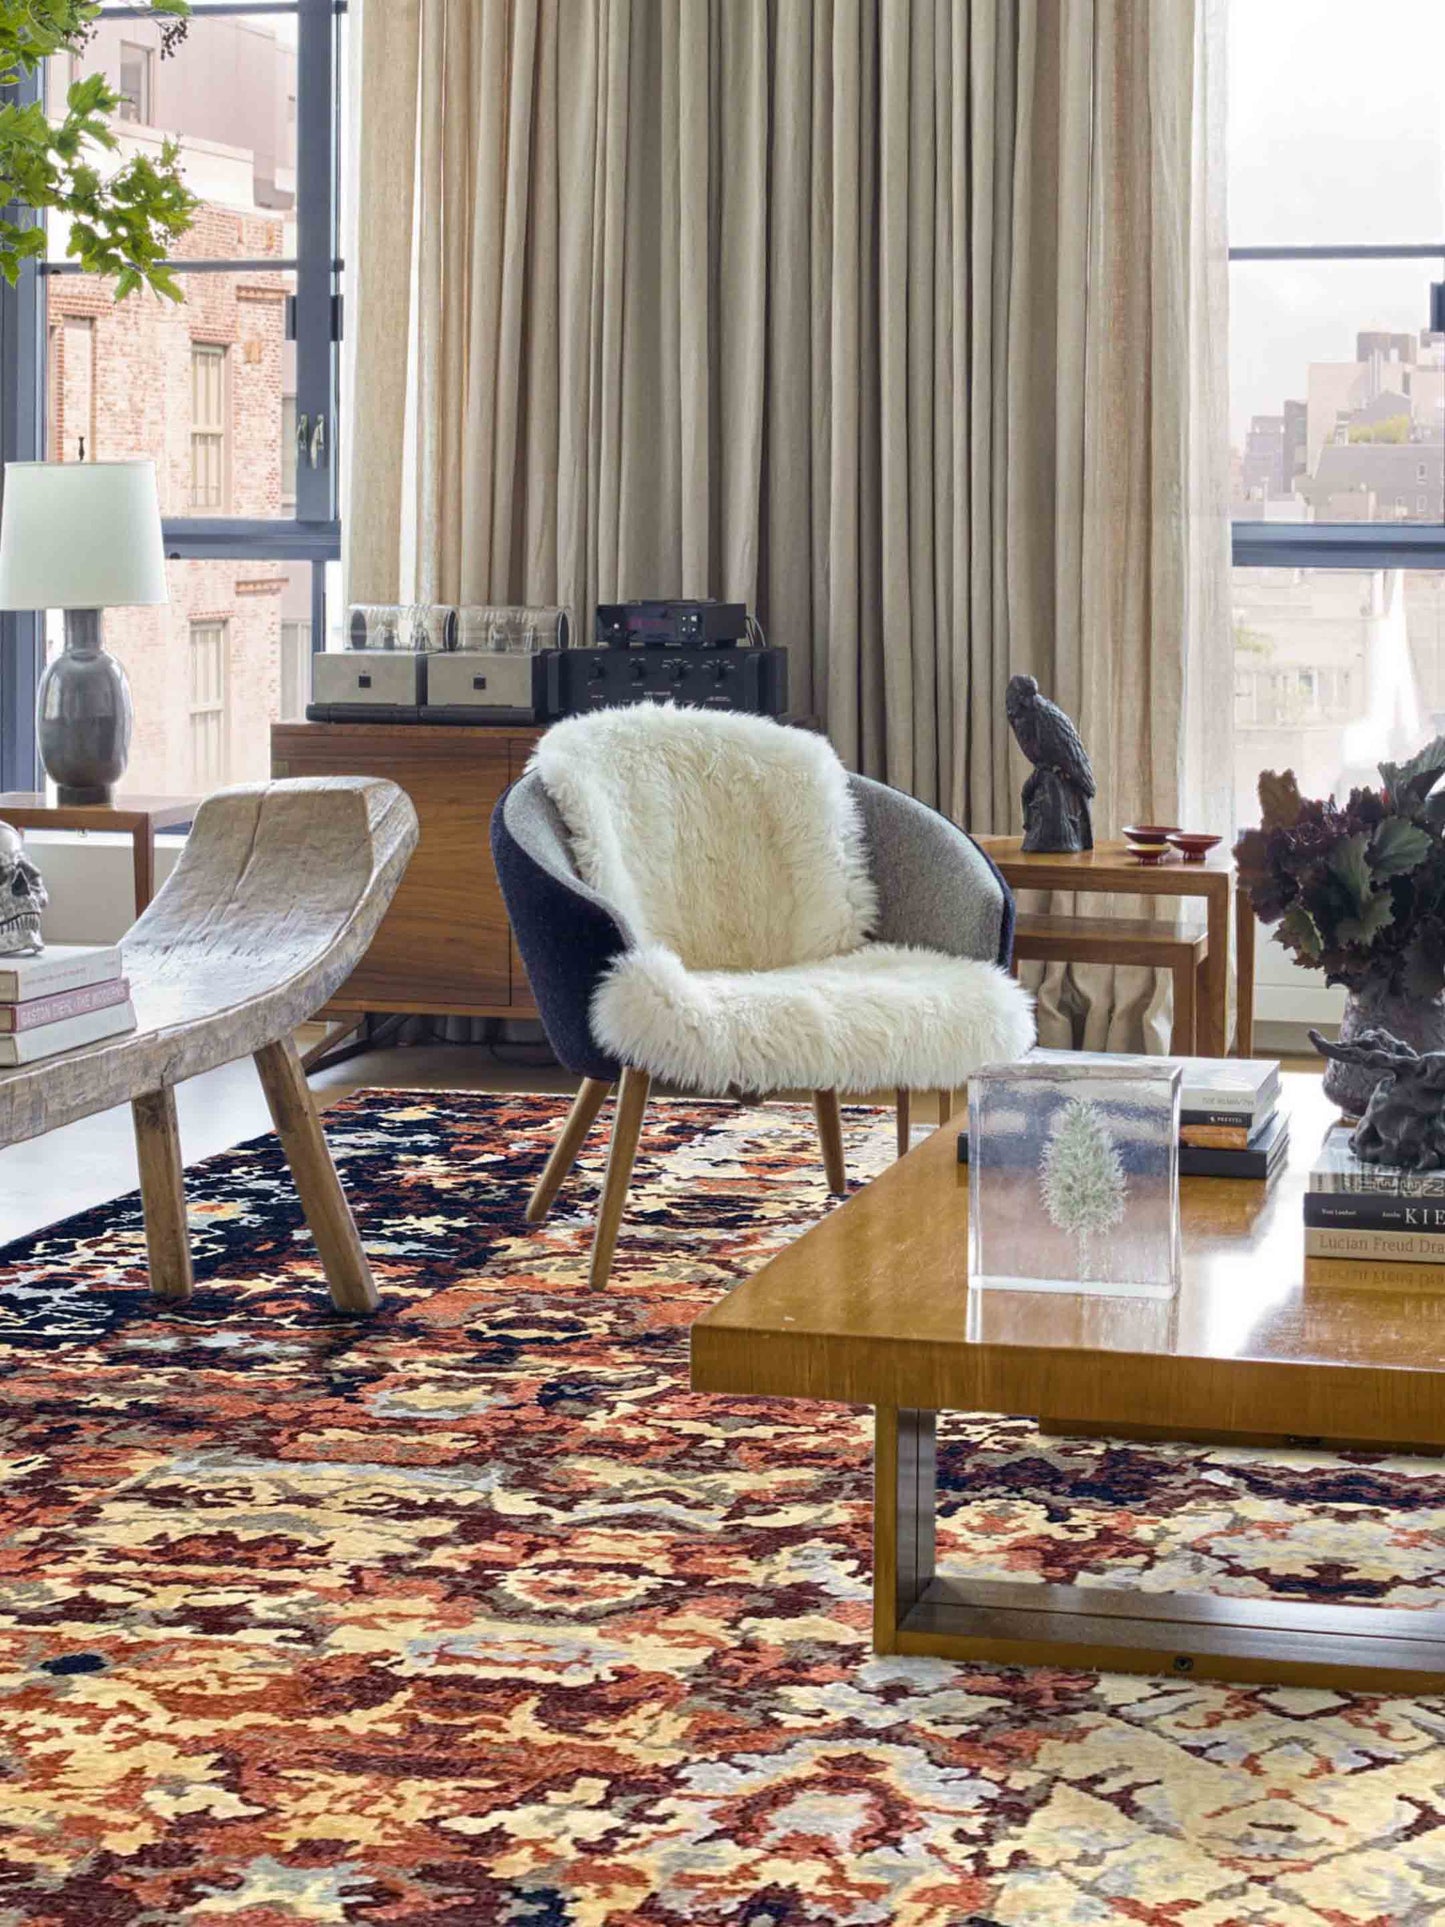 Artisan Abigail  Multi  Transitional Knotted Rug